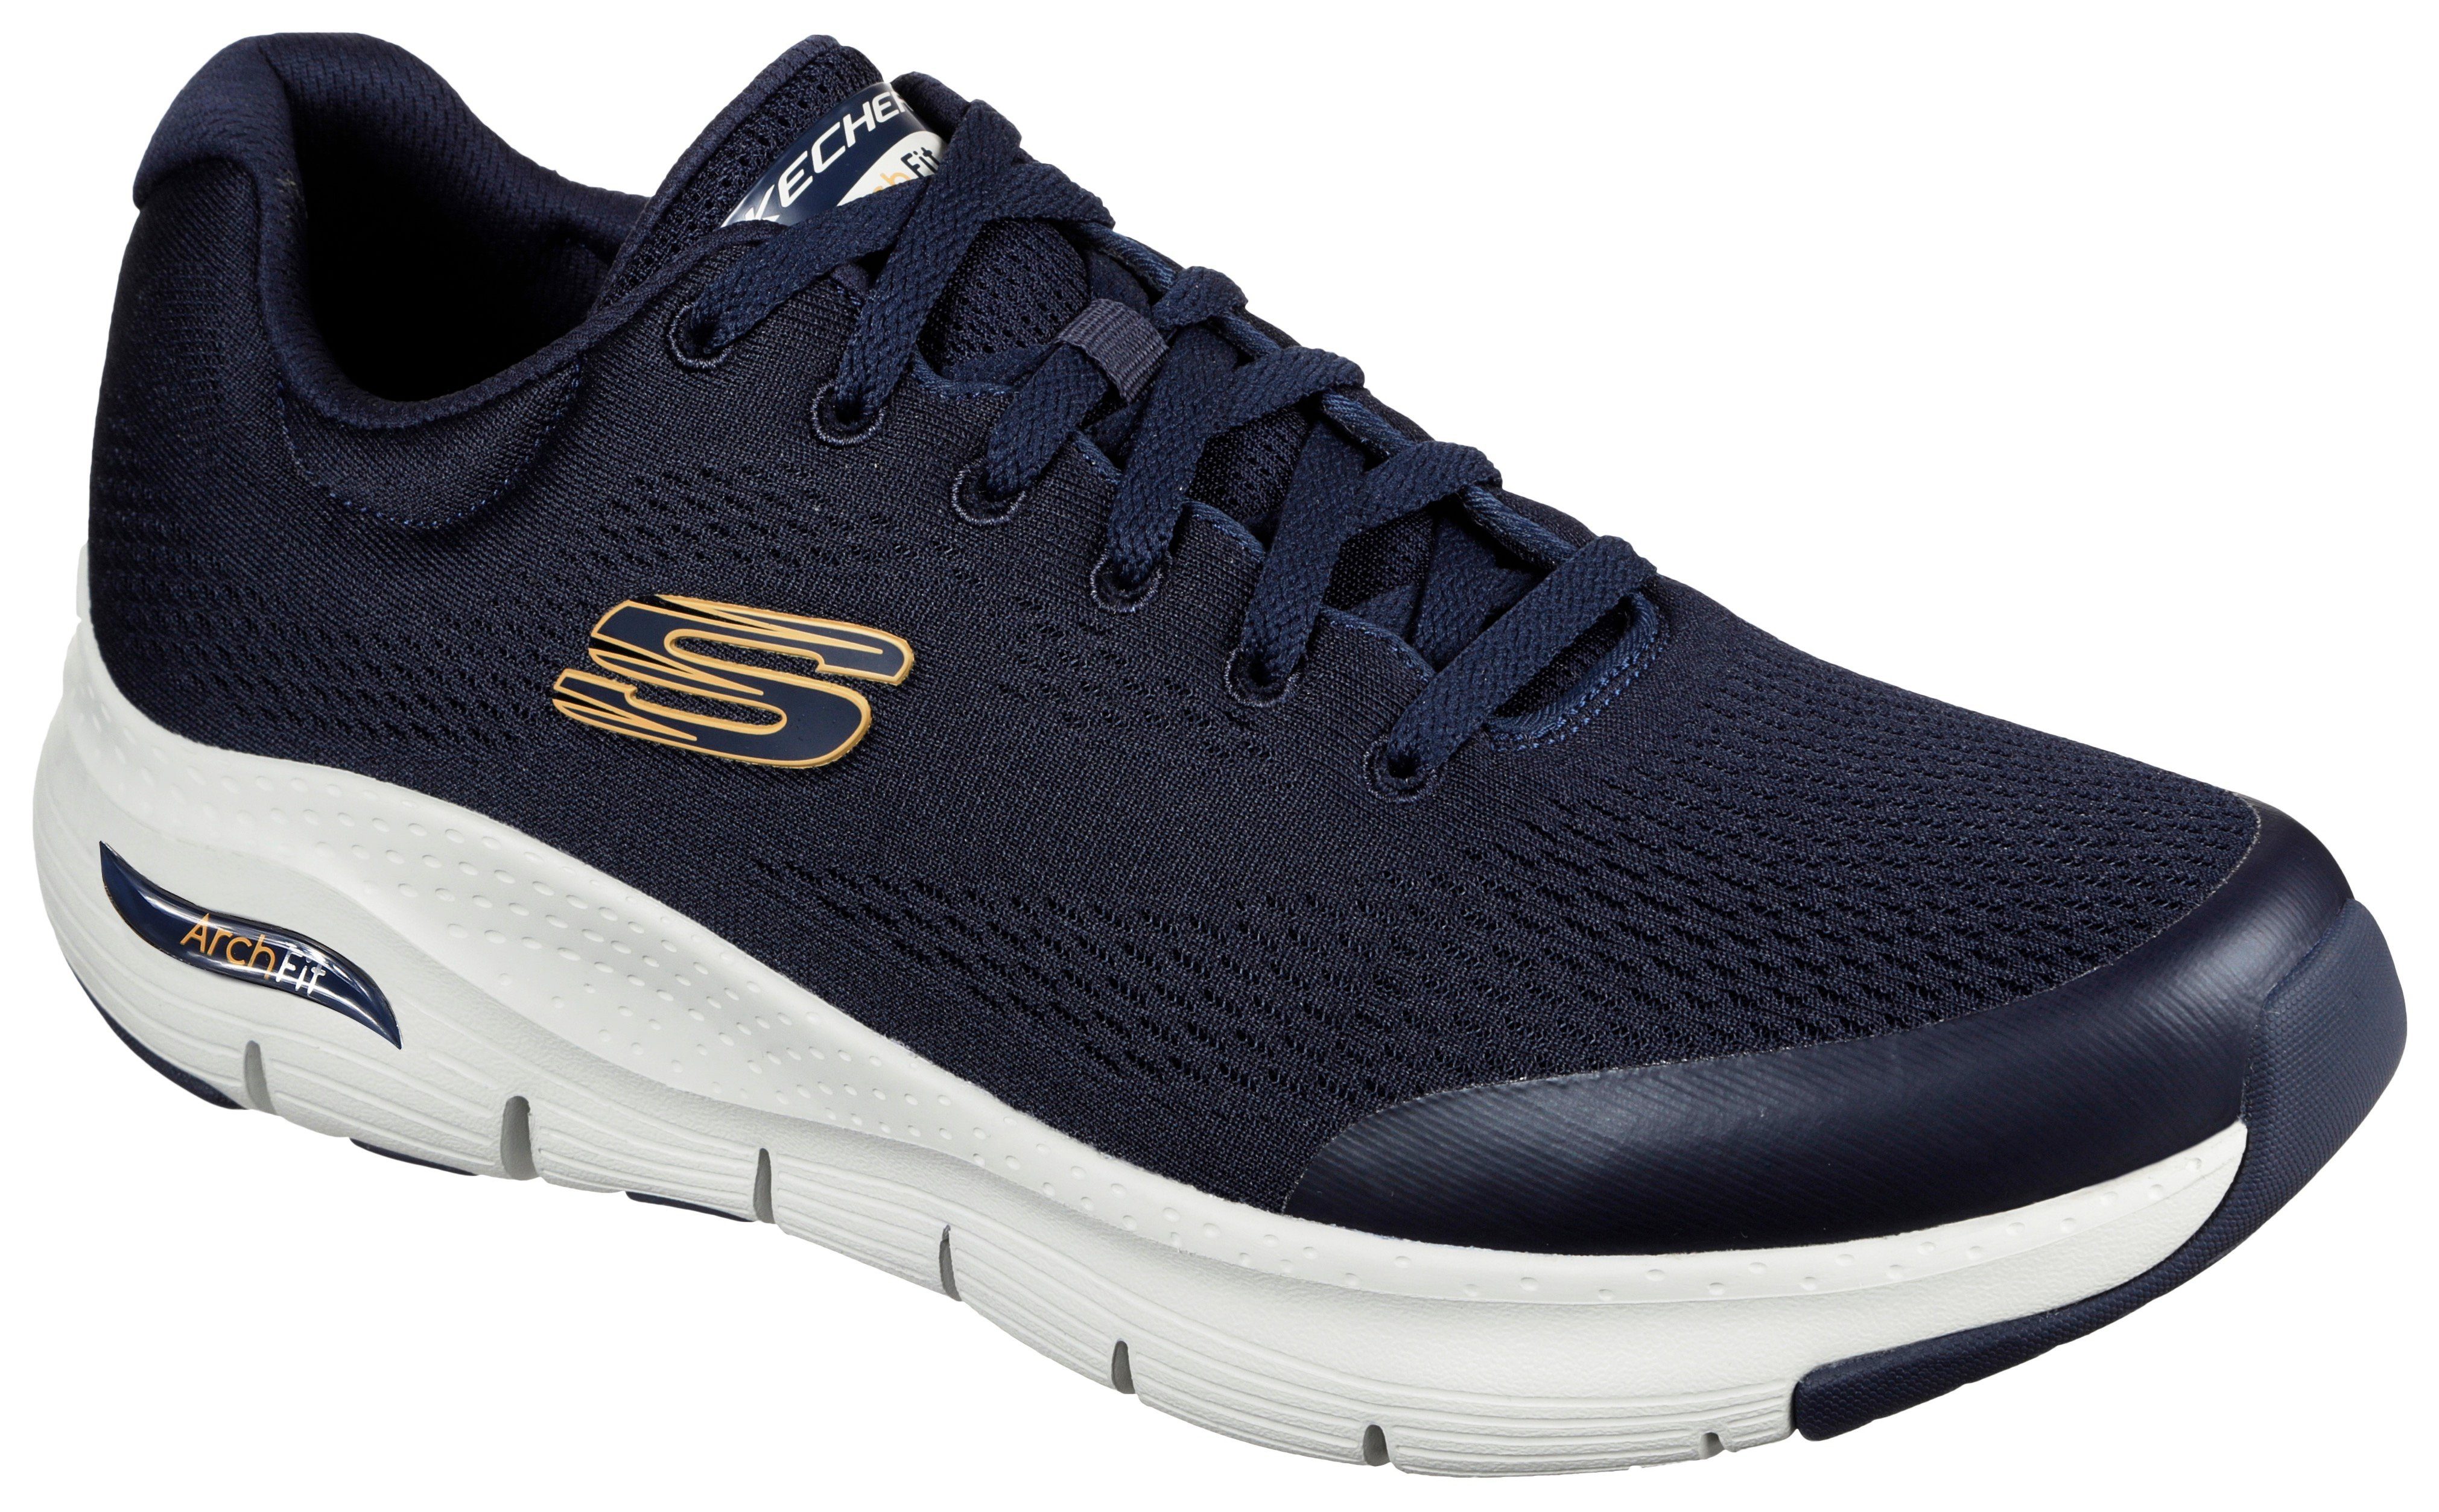 Fit-Innensohle mit FIT Skechers ARCH navy Arch Sneaker